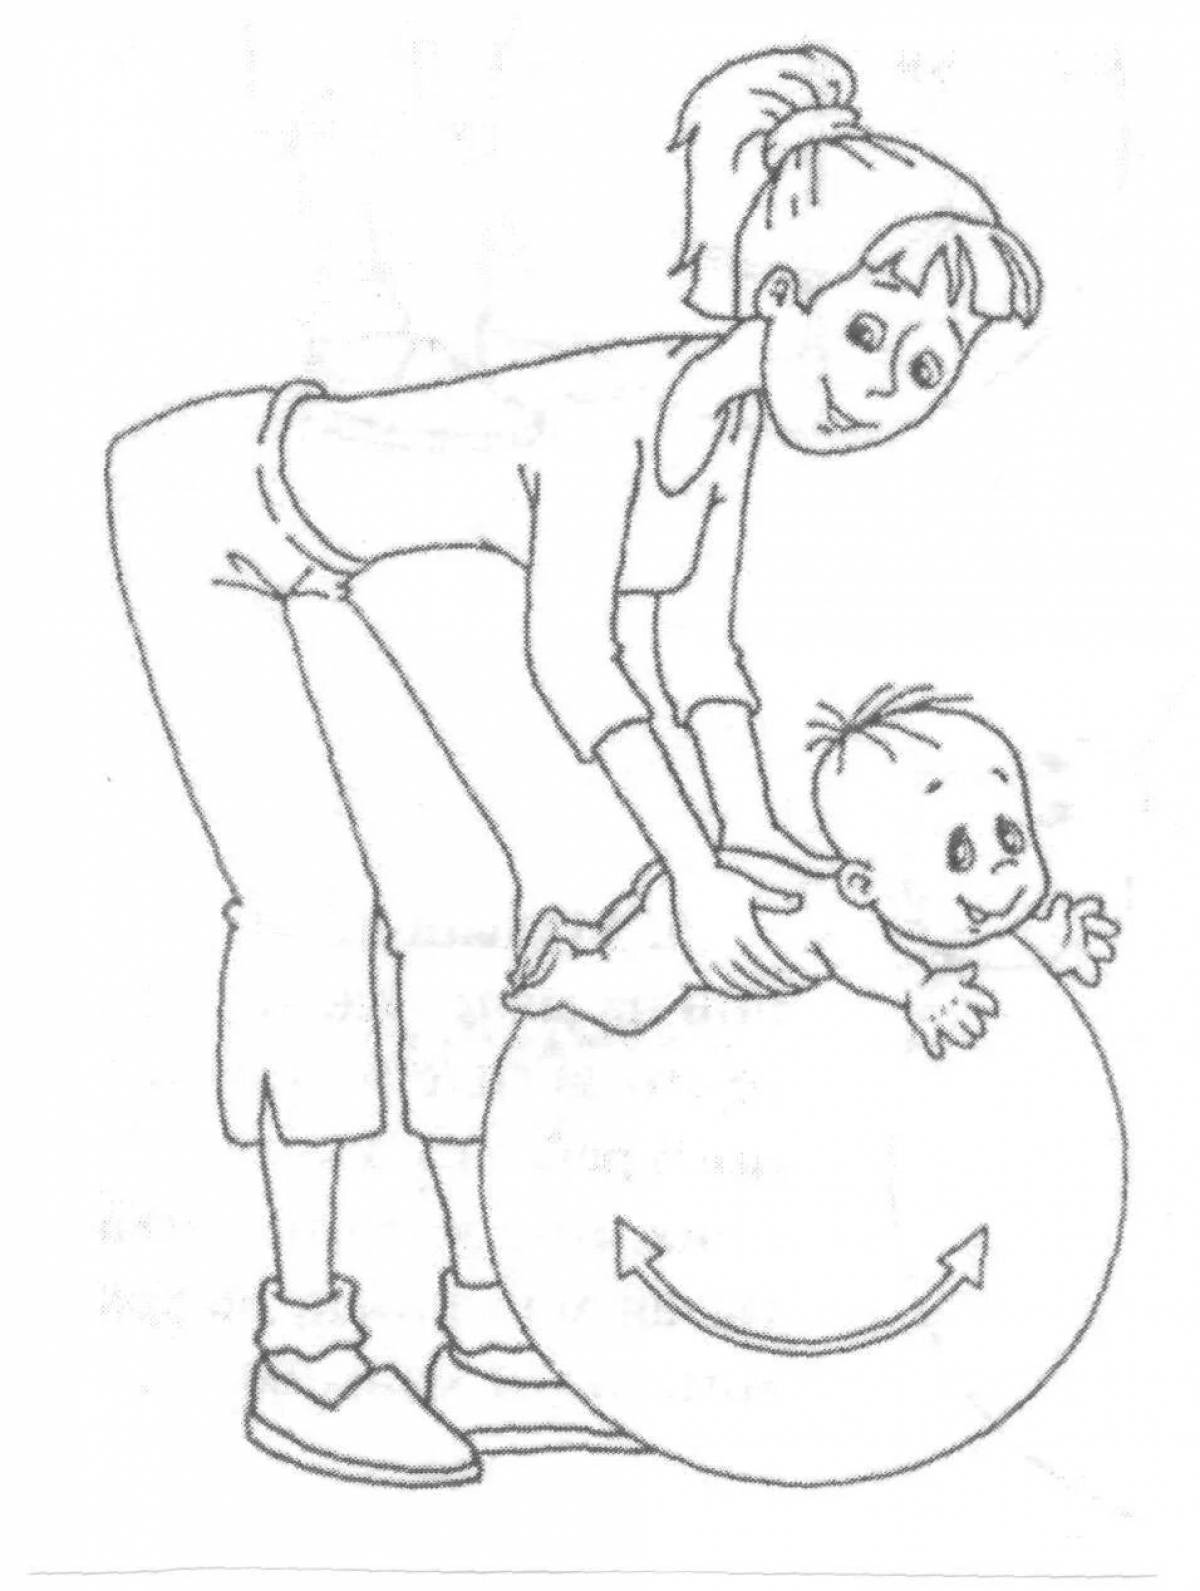 Exercise for kids #21